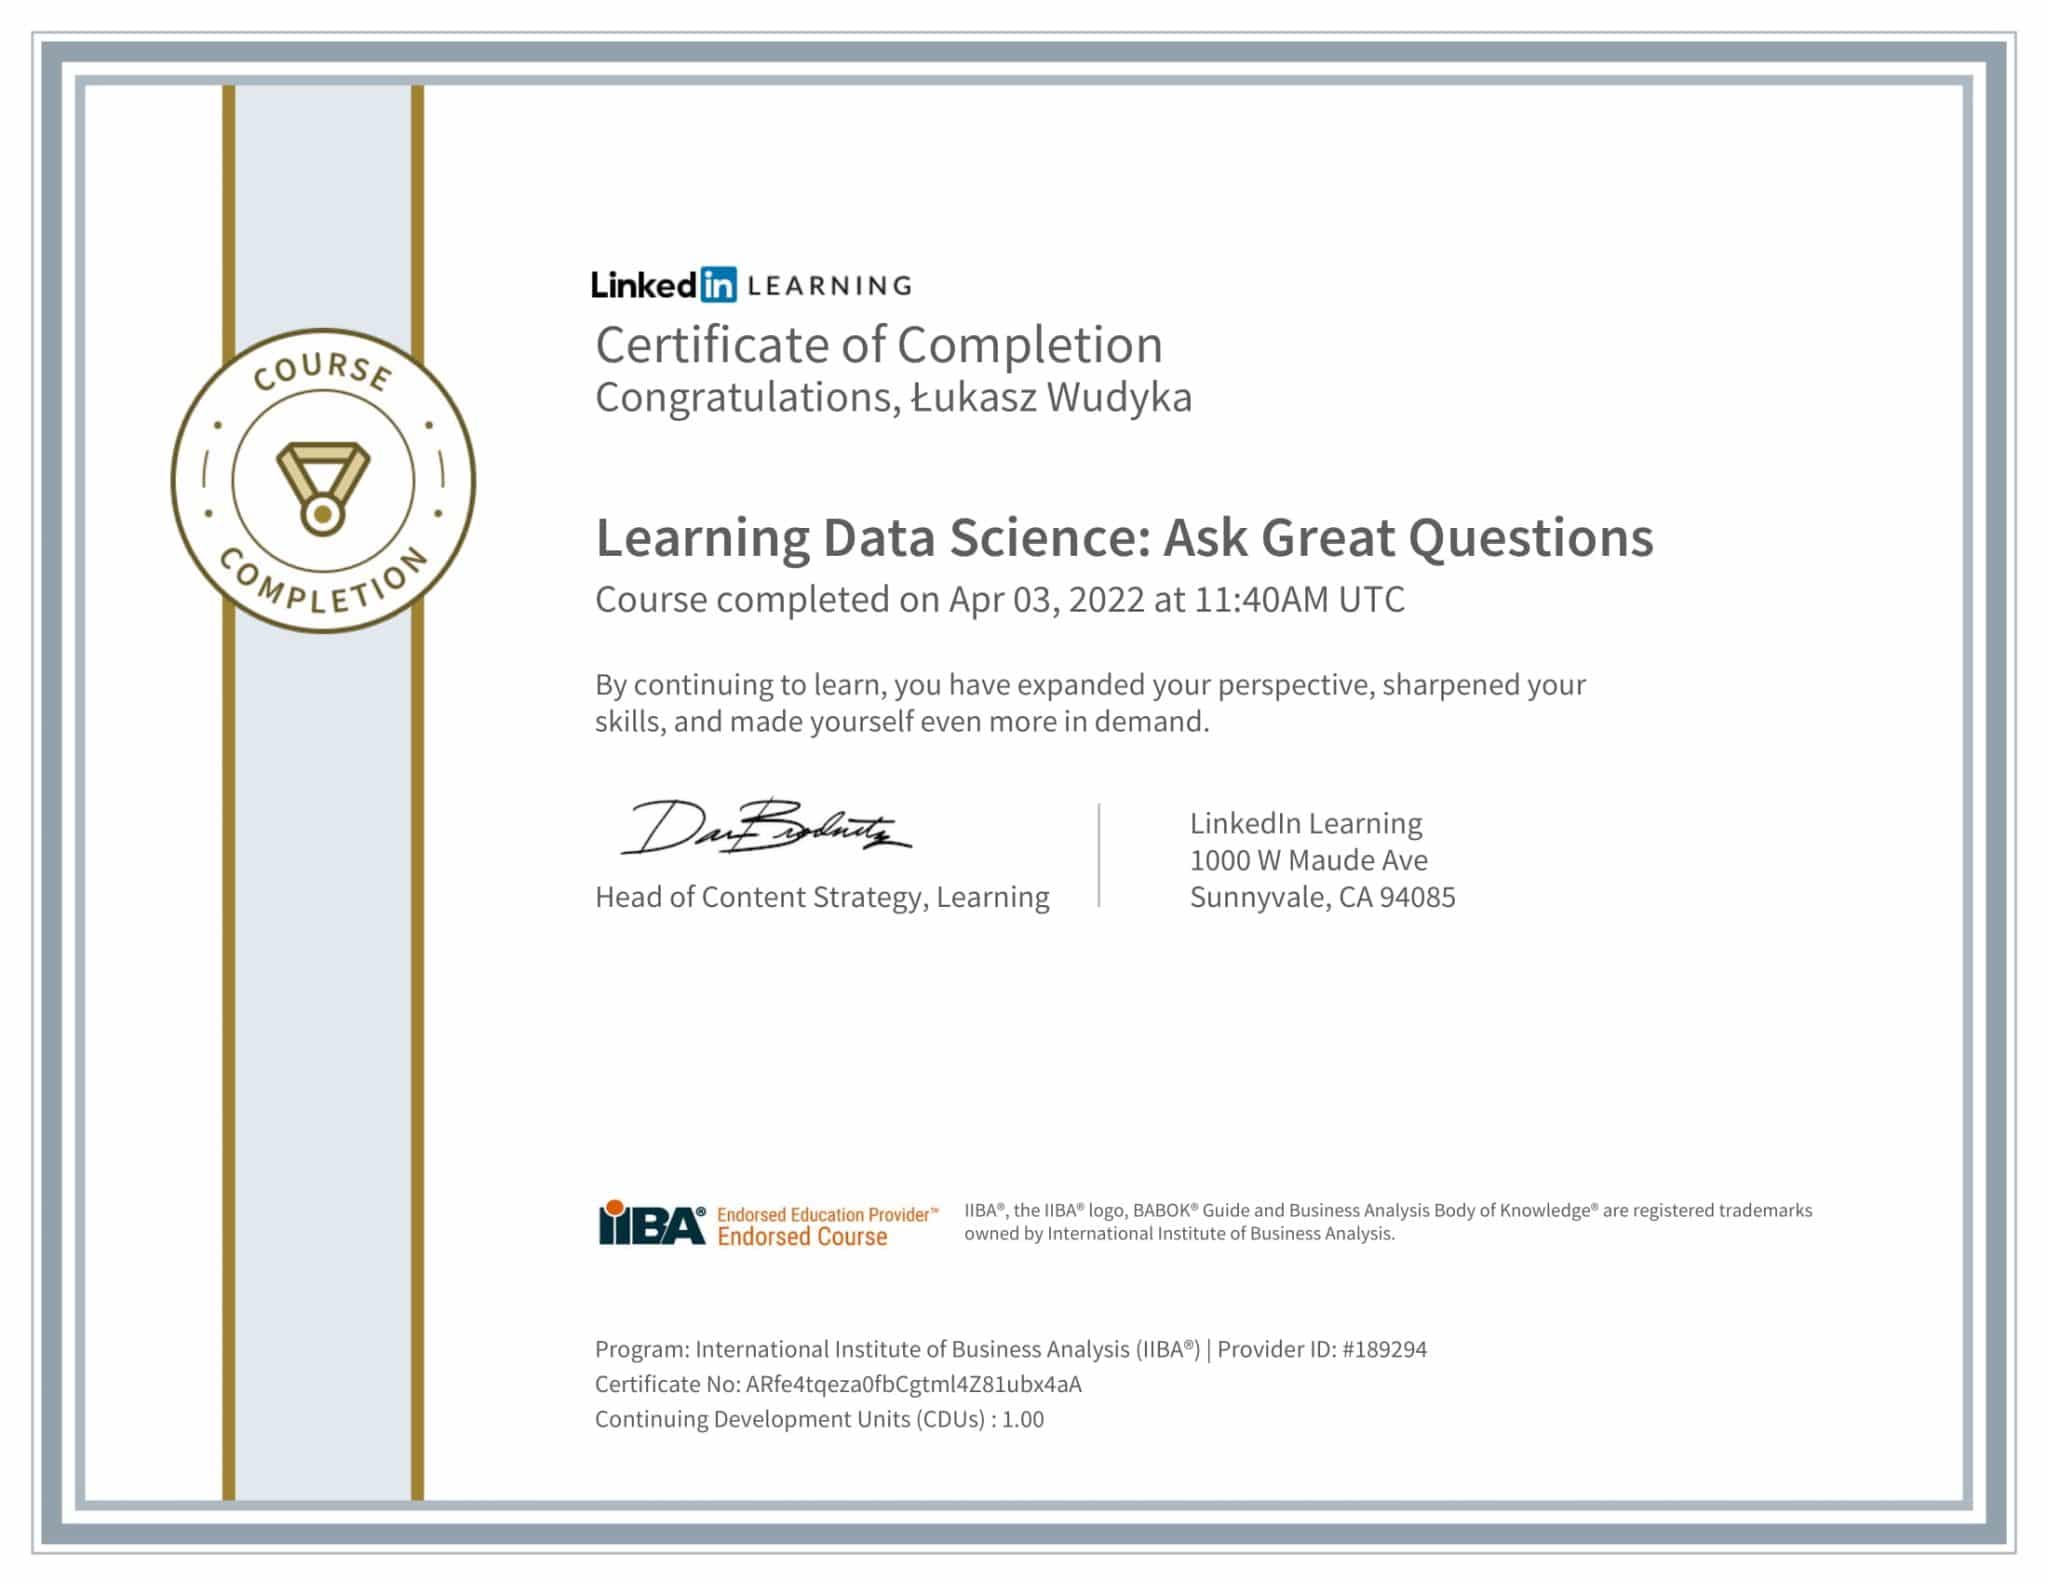 CertificateOfCompletion_Learning Data Science Ask Great Questions-1